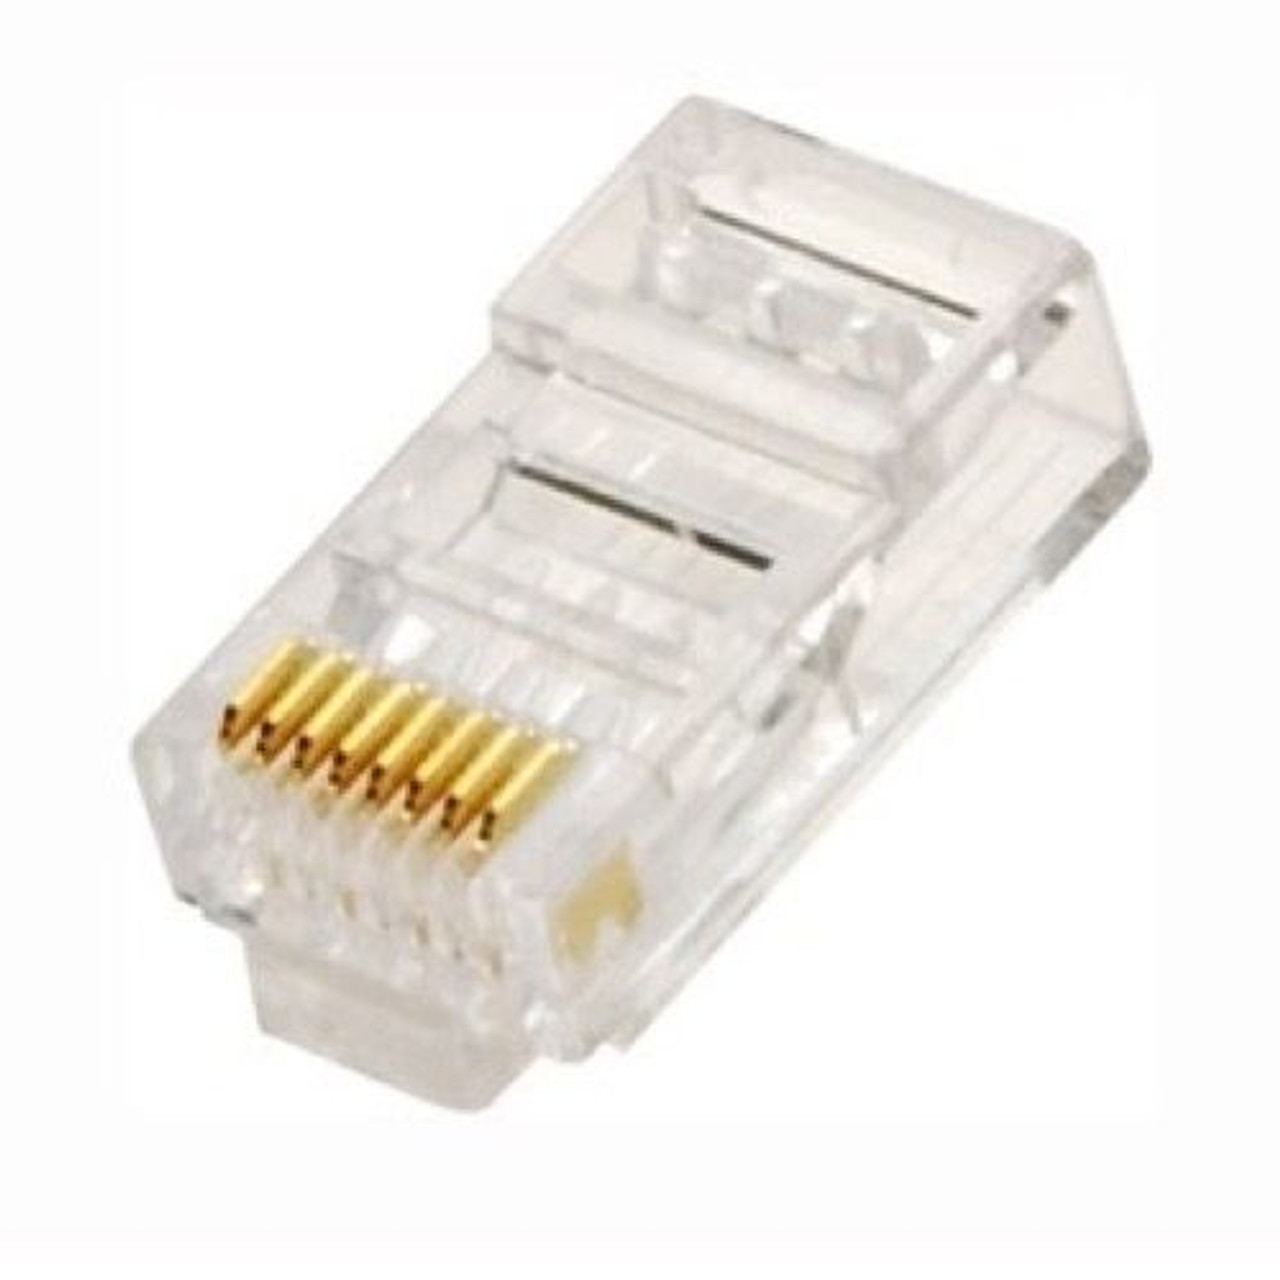 Channel Master RJ45 RJ-45 Connector CAT6 Plug Modular 8P8C Gold Plated Network Cable Data 50m Signal Snap-In Phone Line Plugs Telephone CAT5 & CAT5E Connectors for Solid Conductor